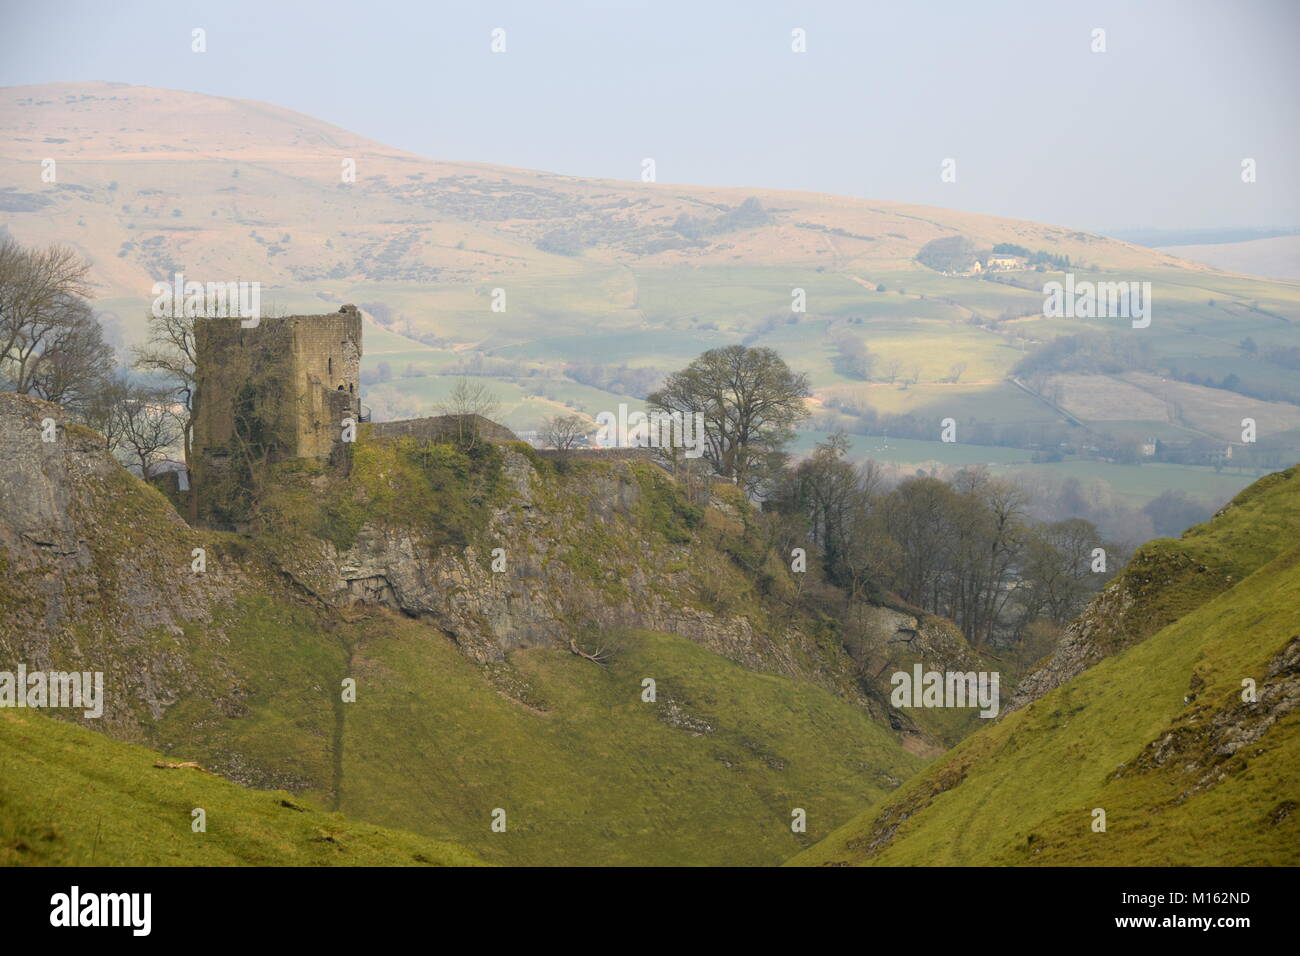 Peveril Castle, a ruined 11th-century castle overlooking the village of Castleton in the English county of Derbyshire Stock Photo